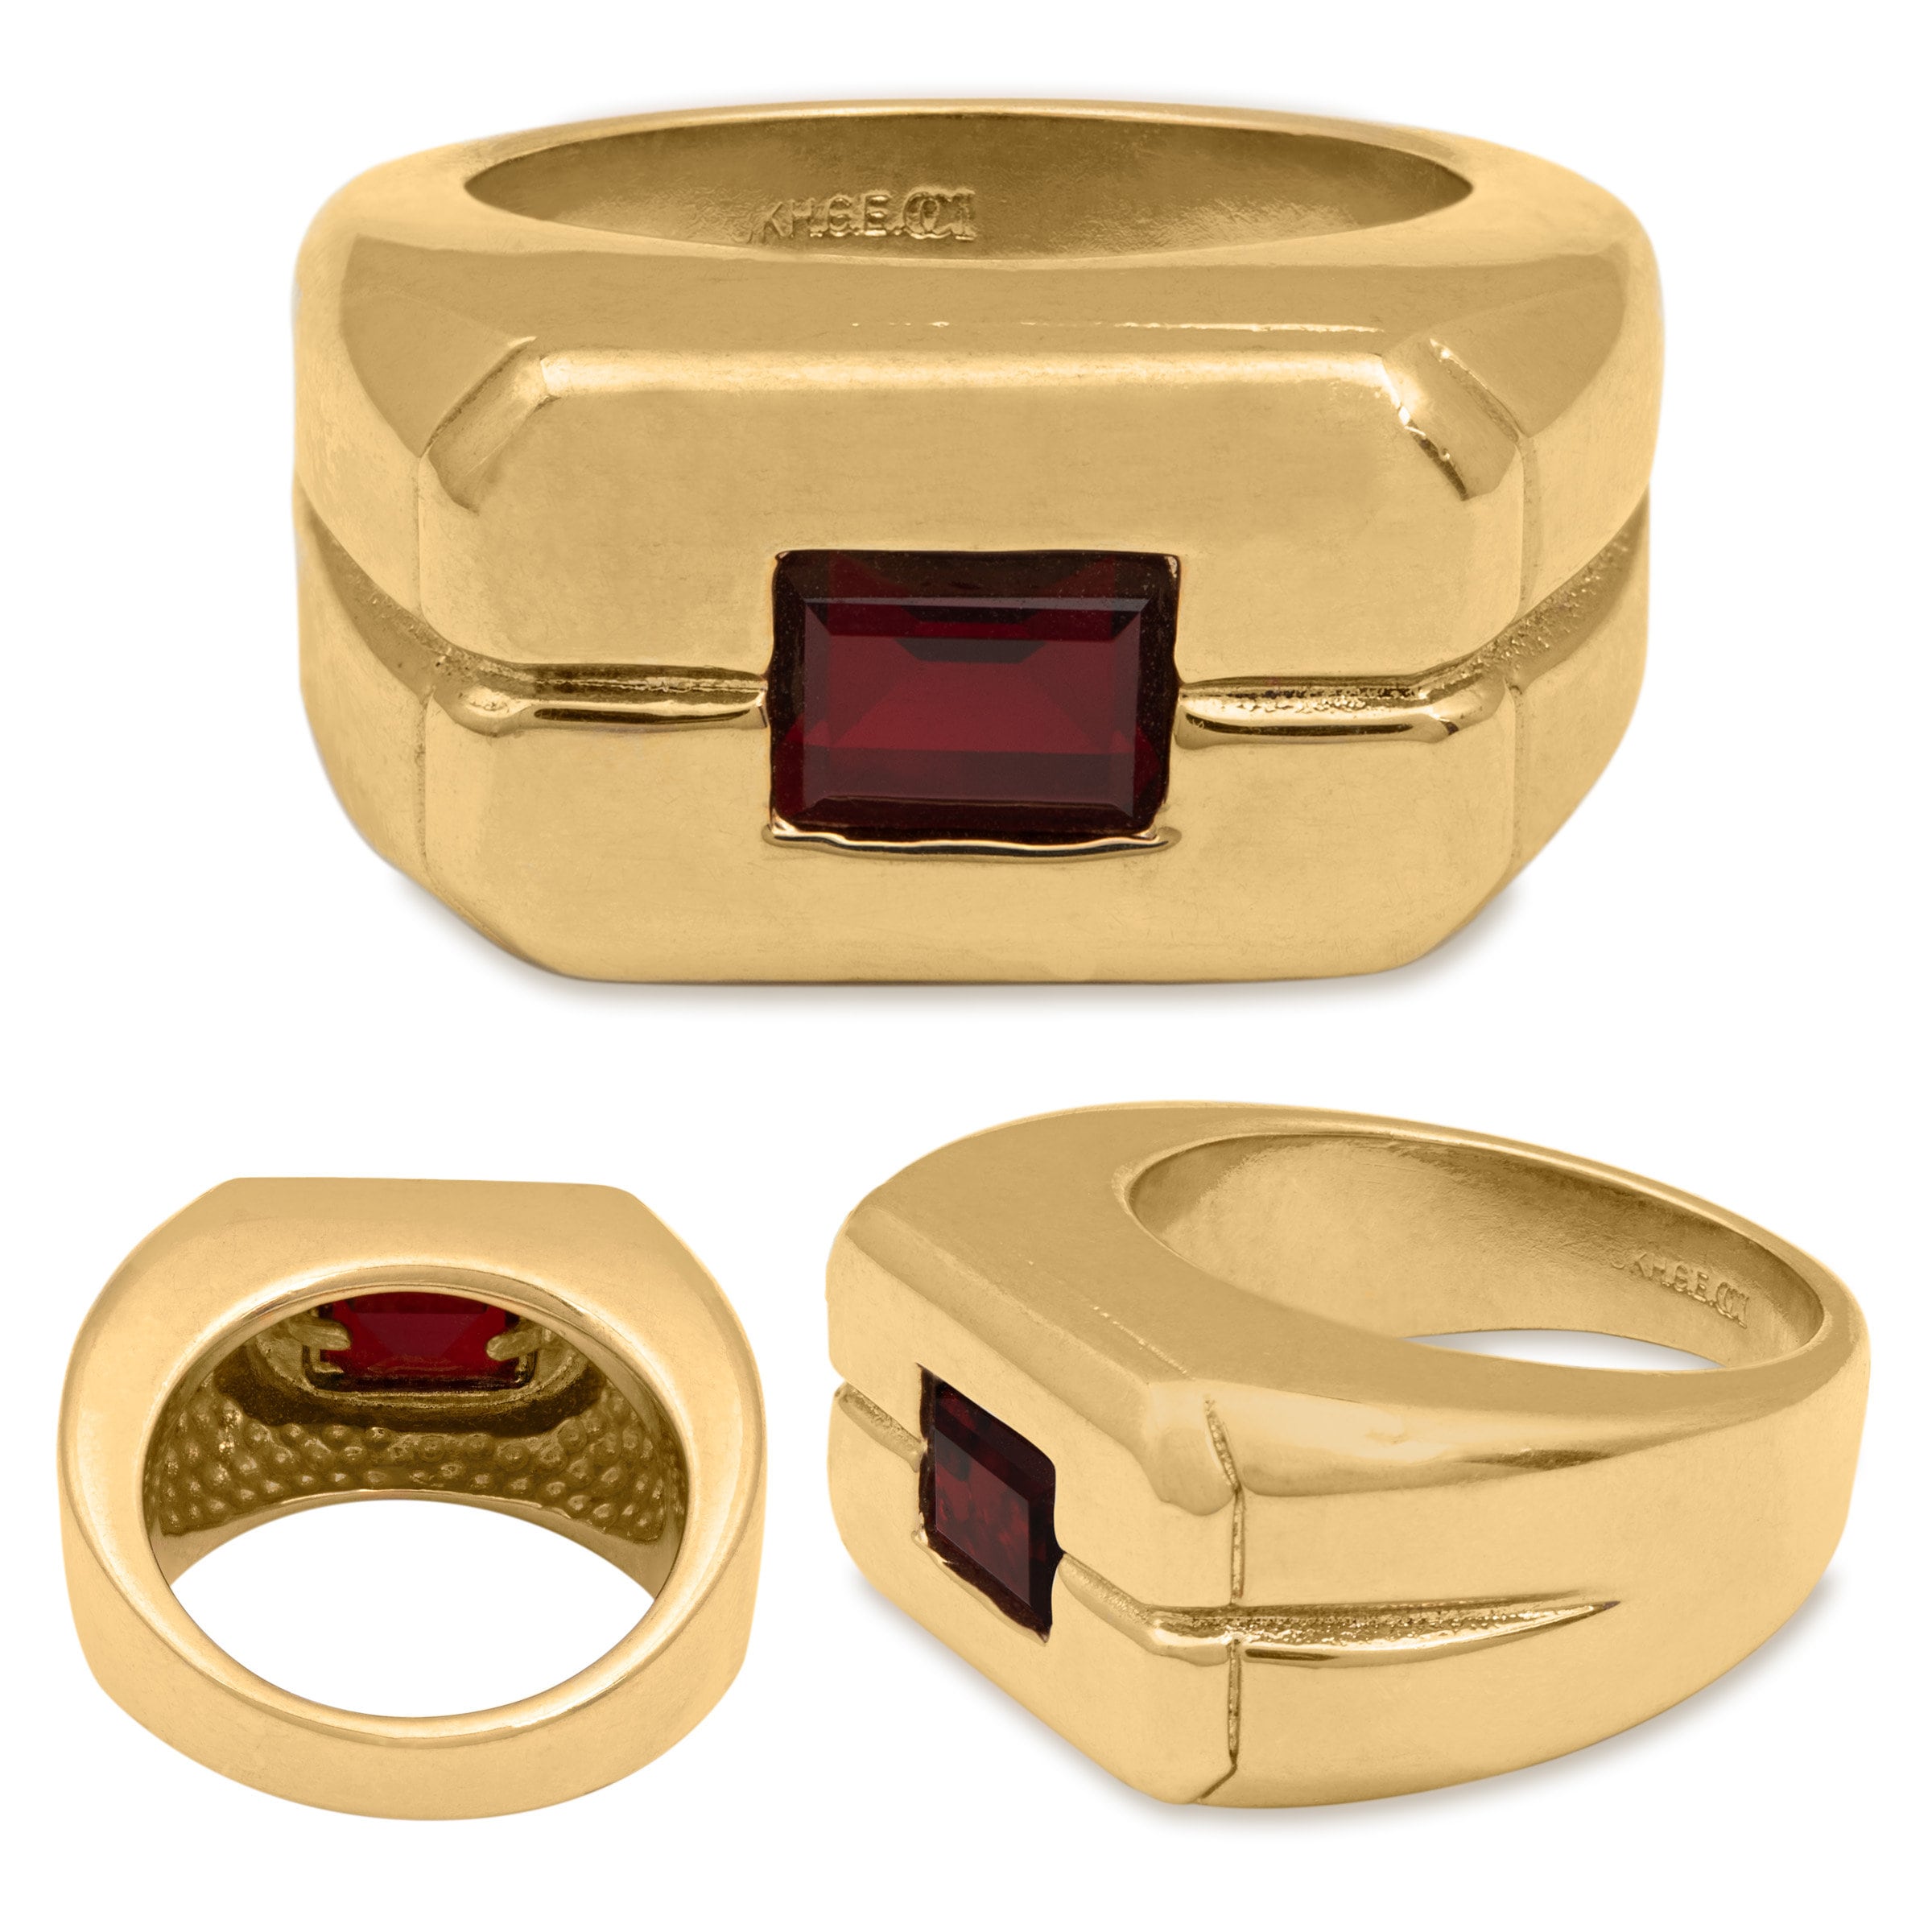 1 Gram Gold Plated Red Stone With Diamond Antique Design Ring For Men -  Style B179 at Rs 2590.00 | Gold Plated Rings | ID: 2849969520548